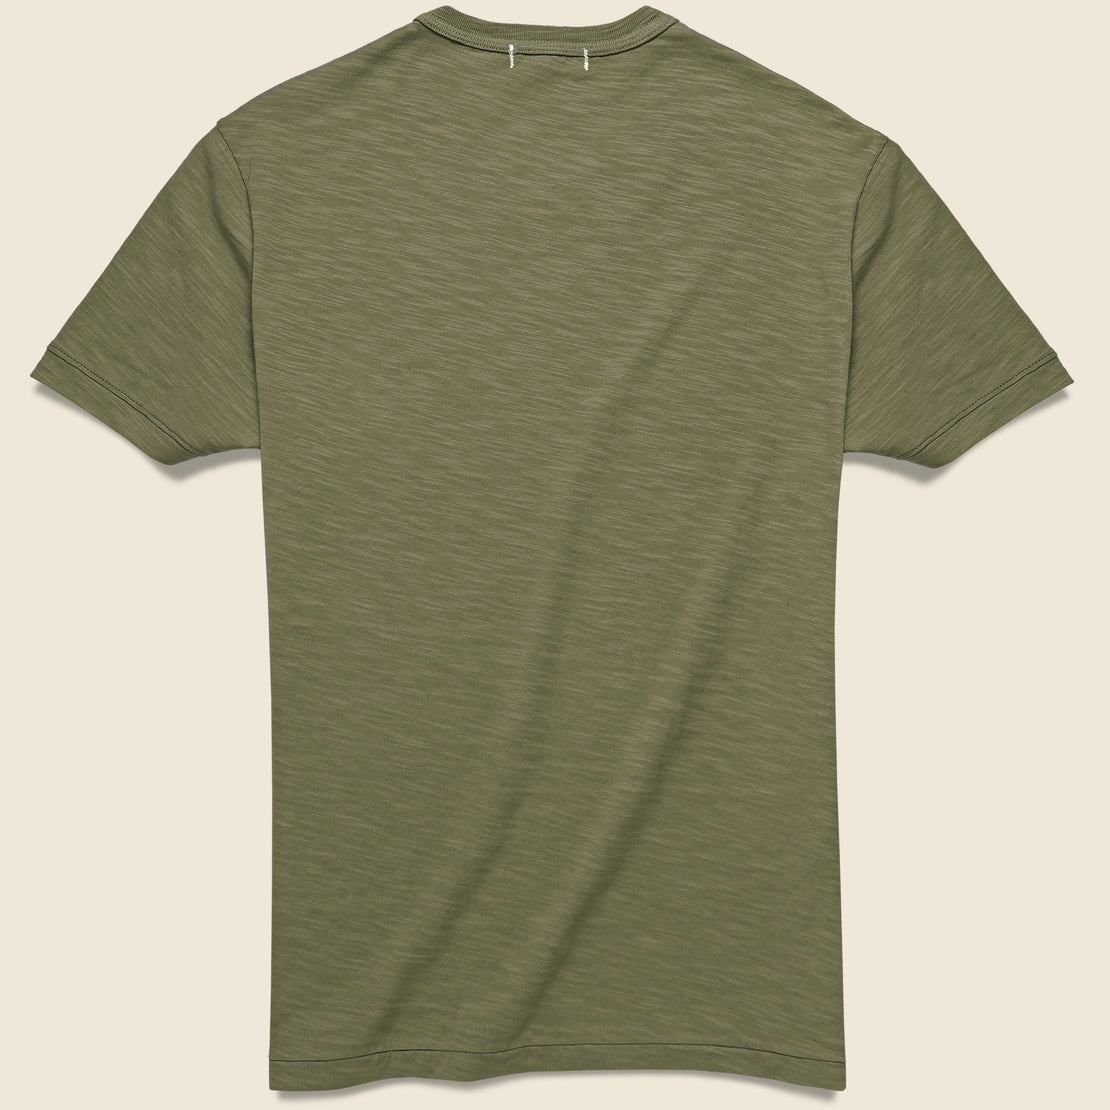 Standard Crew Tee - Deep Olive - Alex Mill - STAG Provisions - Tops - S/S Tee